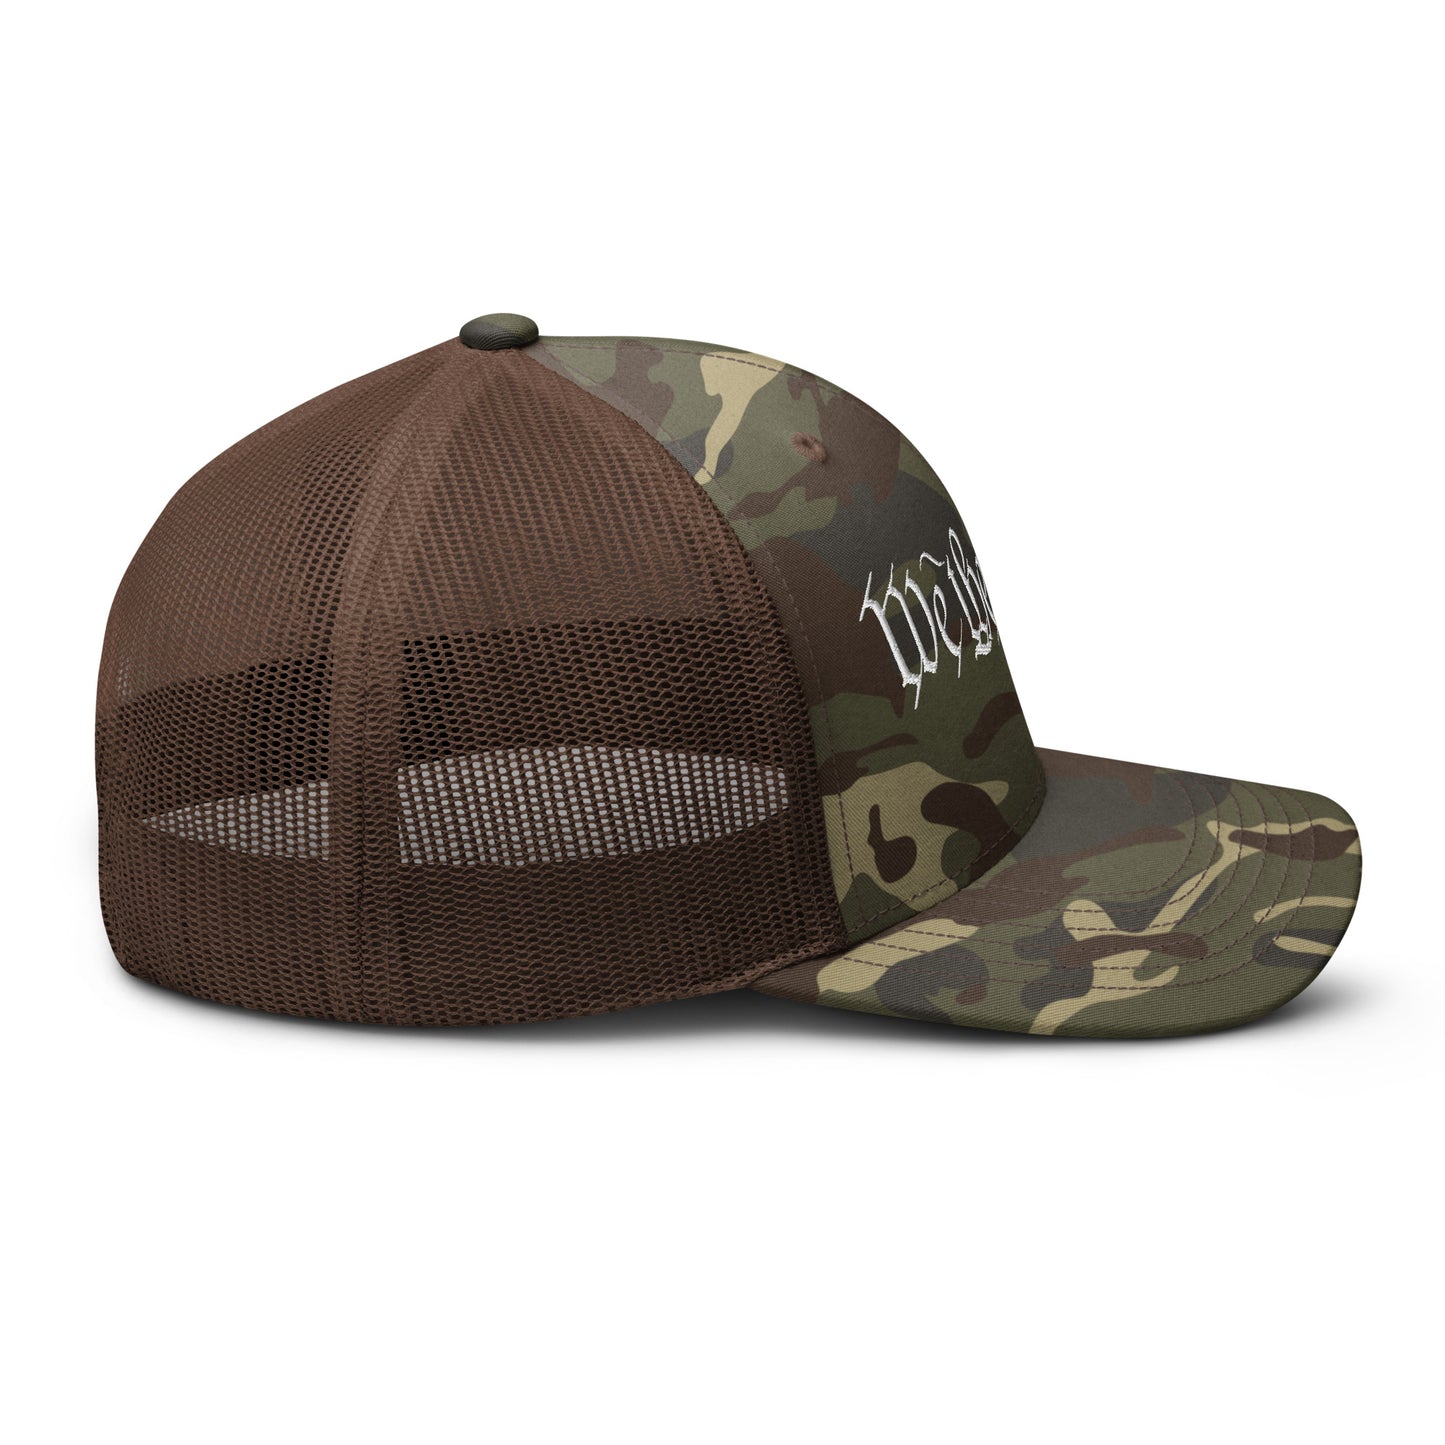 We The People Camouflage Trucker Hat